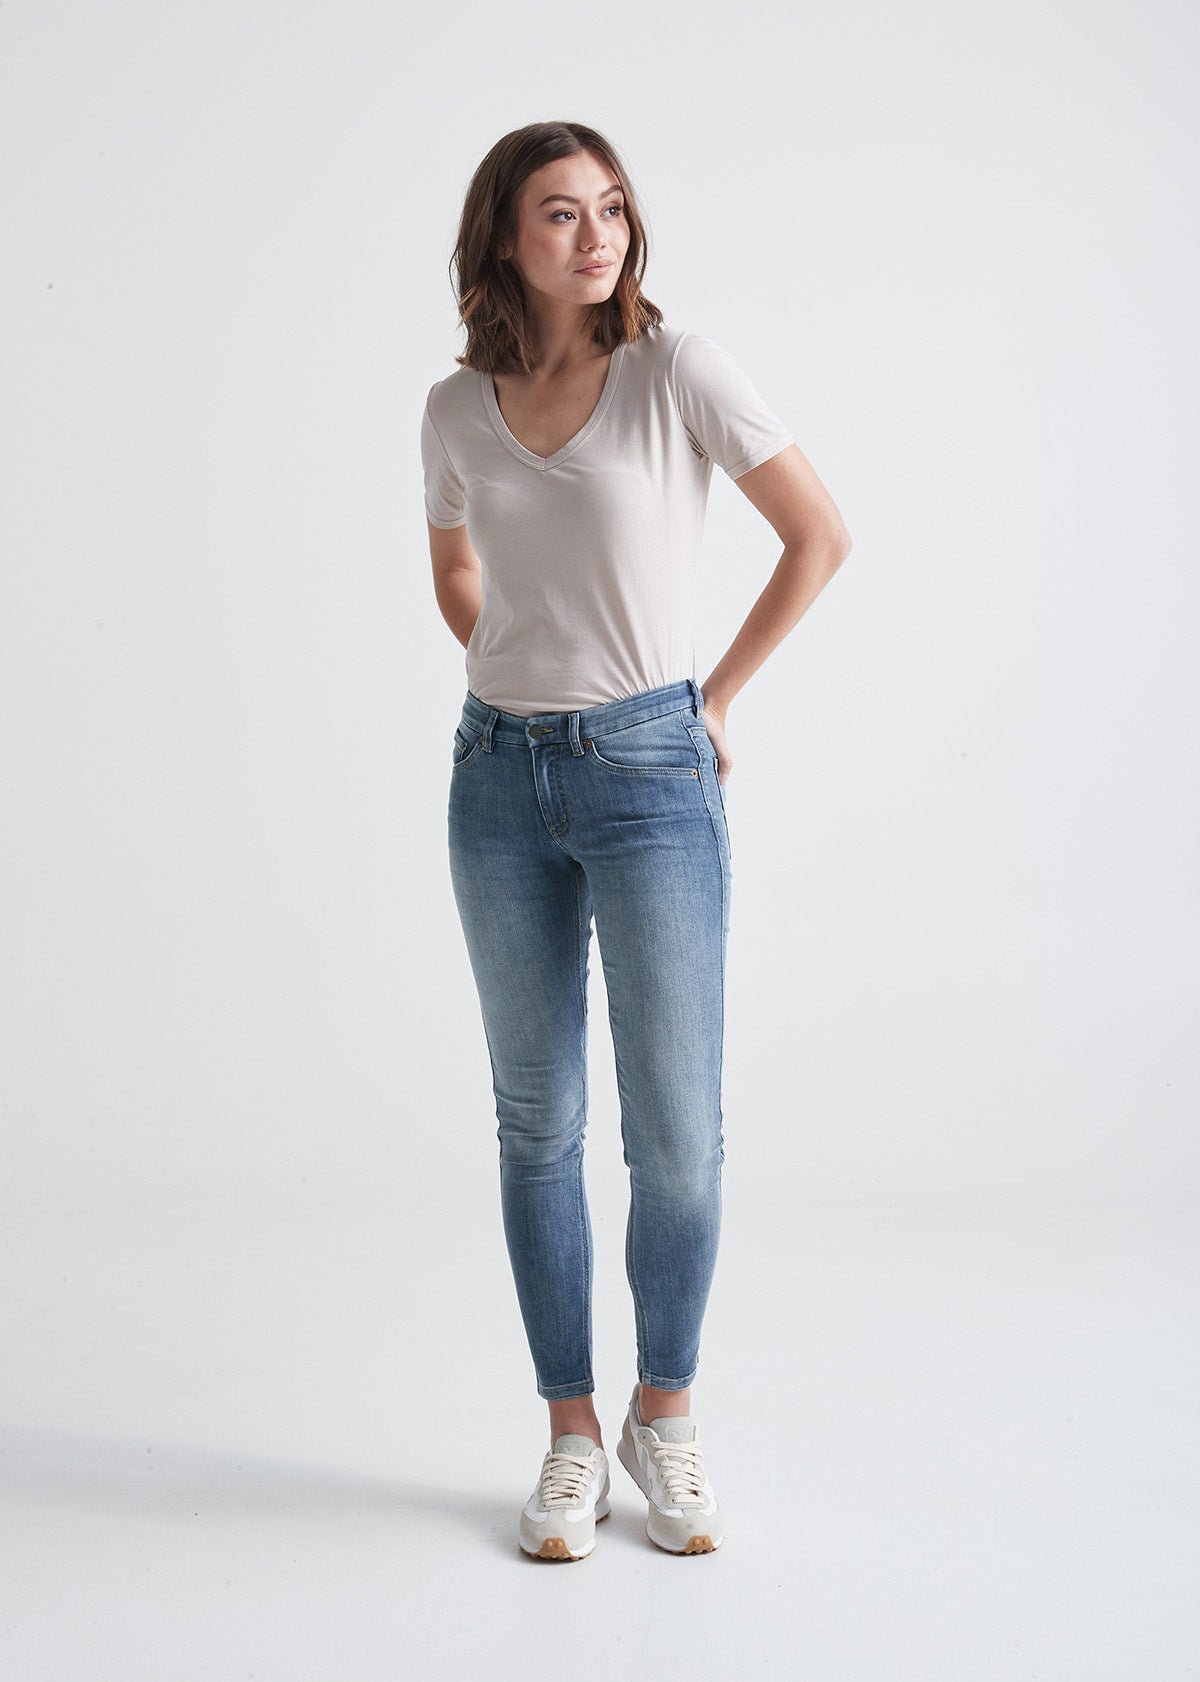 Low Waist for Women Skinny Push Up Jeans Slim Fit Femme Mid Rise